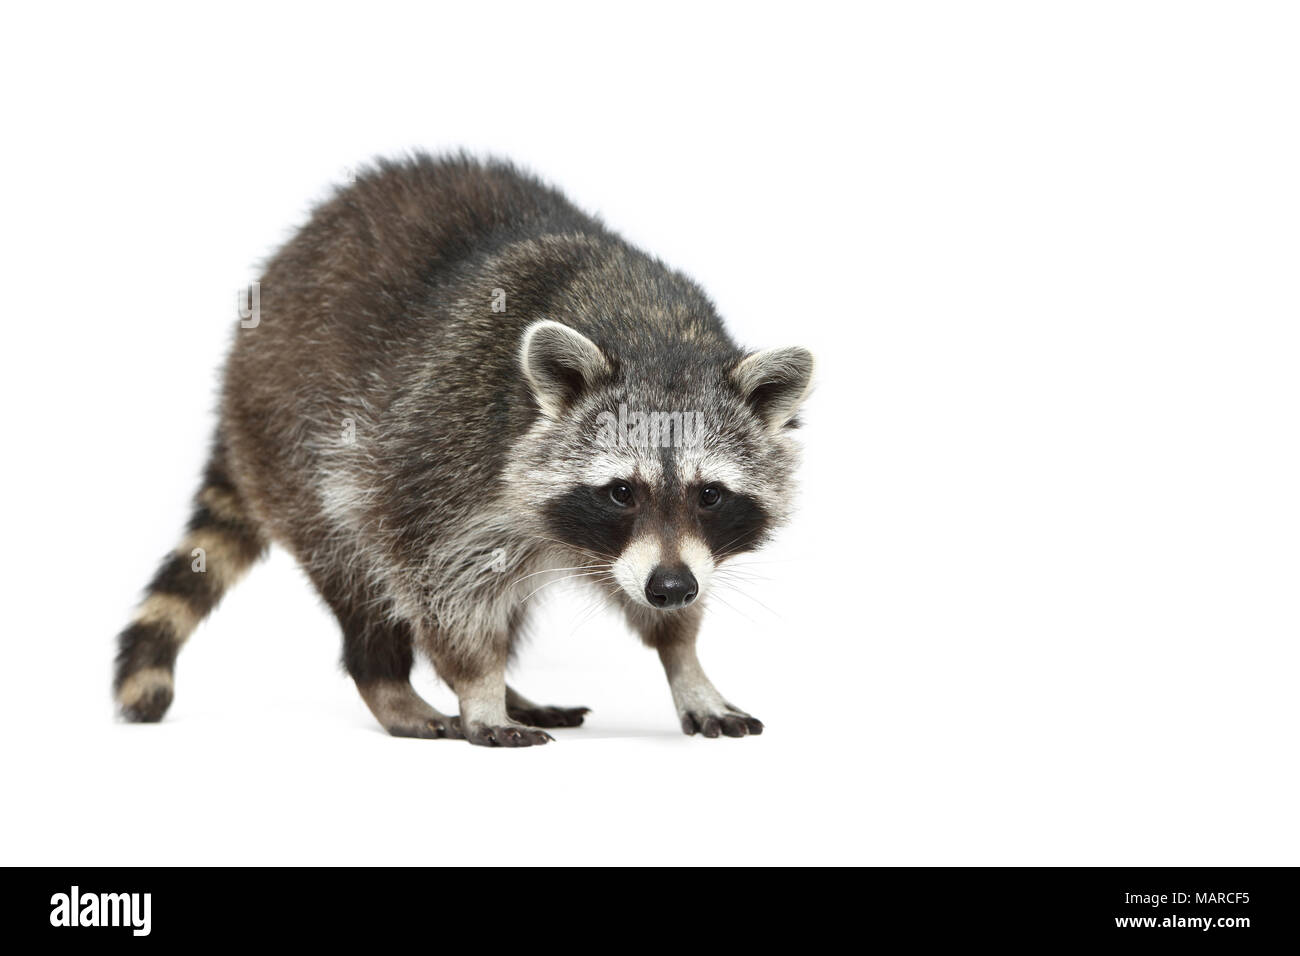 Raccoon (Procyon lotor). Adult walking. Studio picture against a white background. Germany Stock Photo